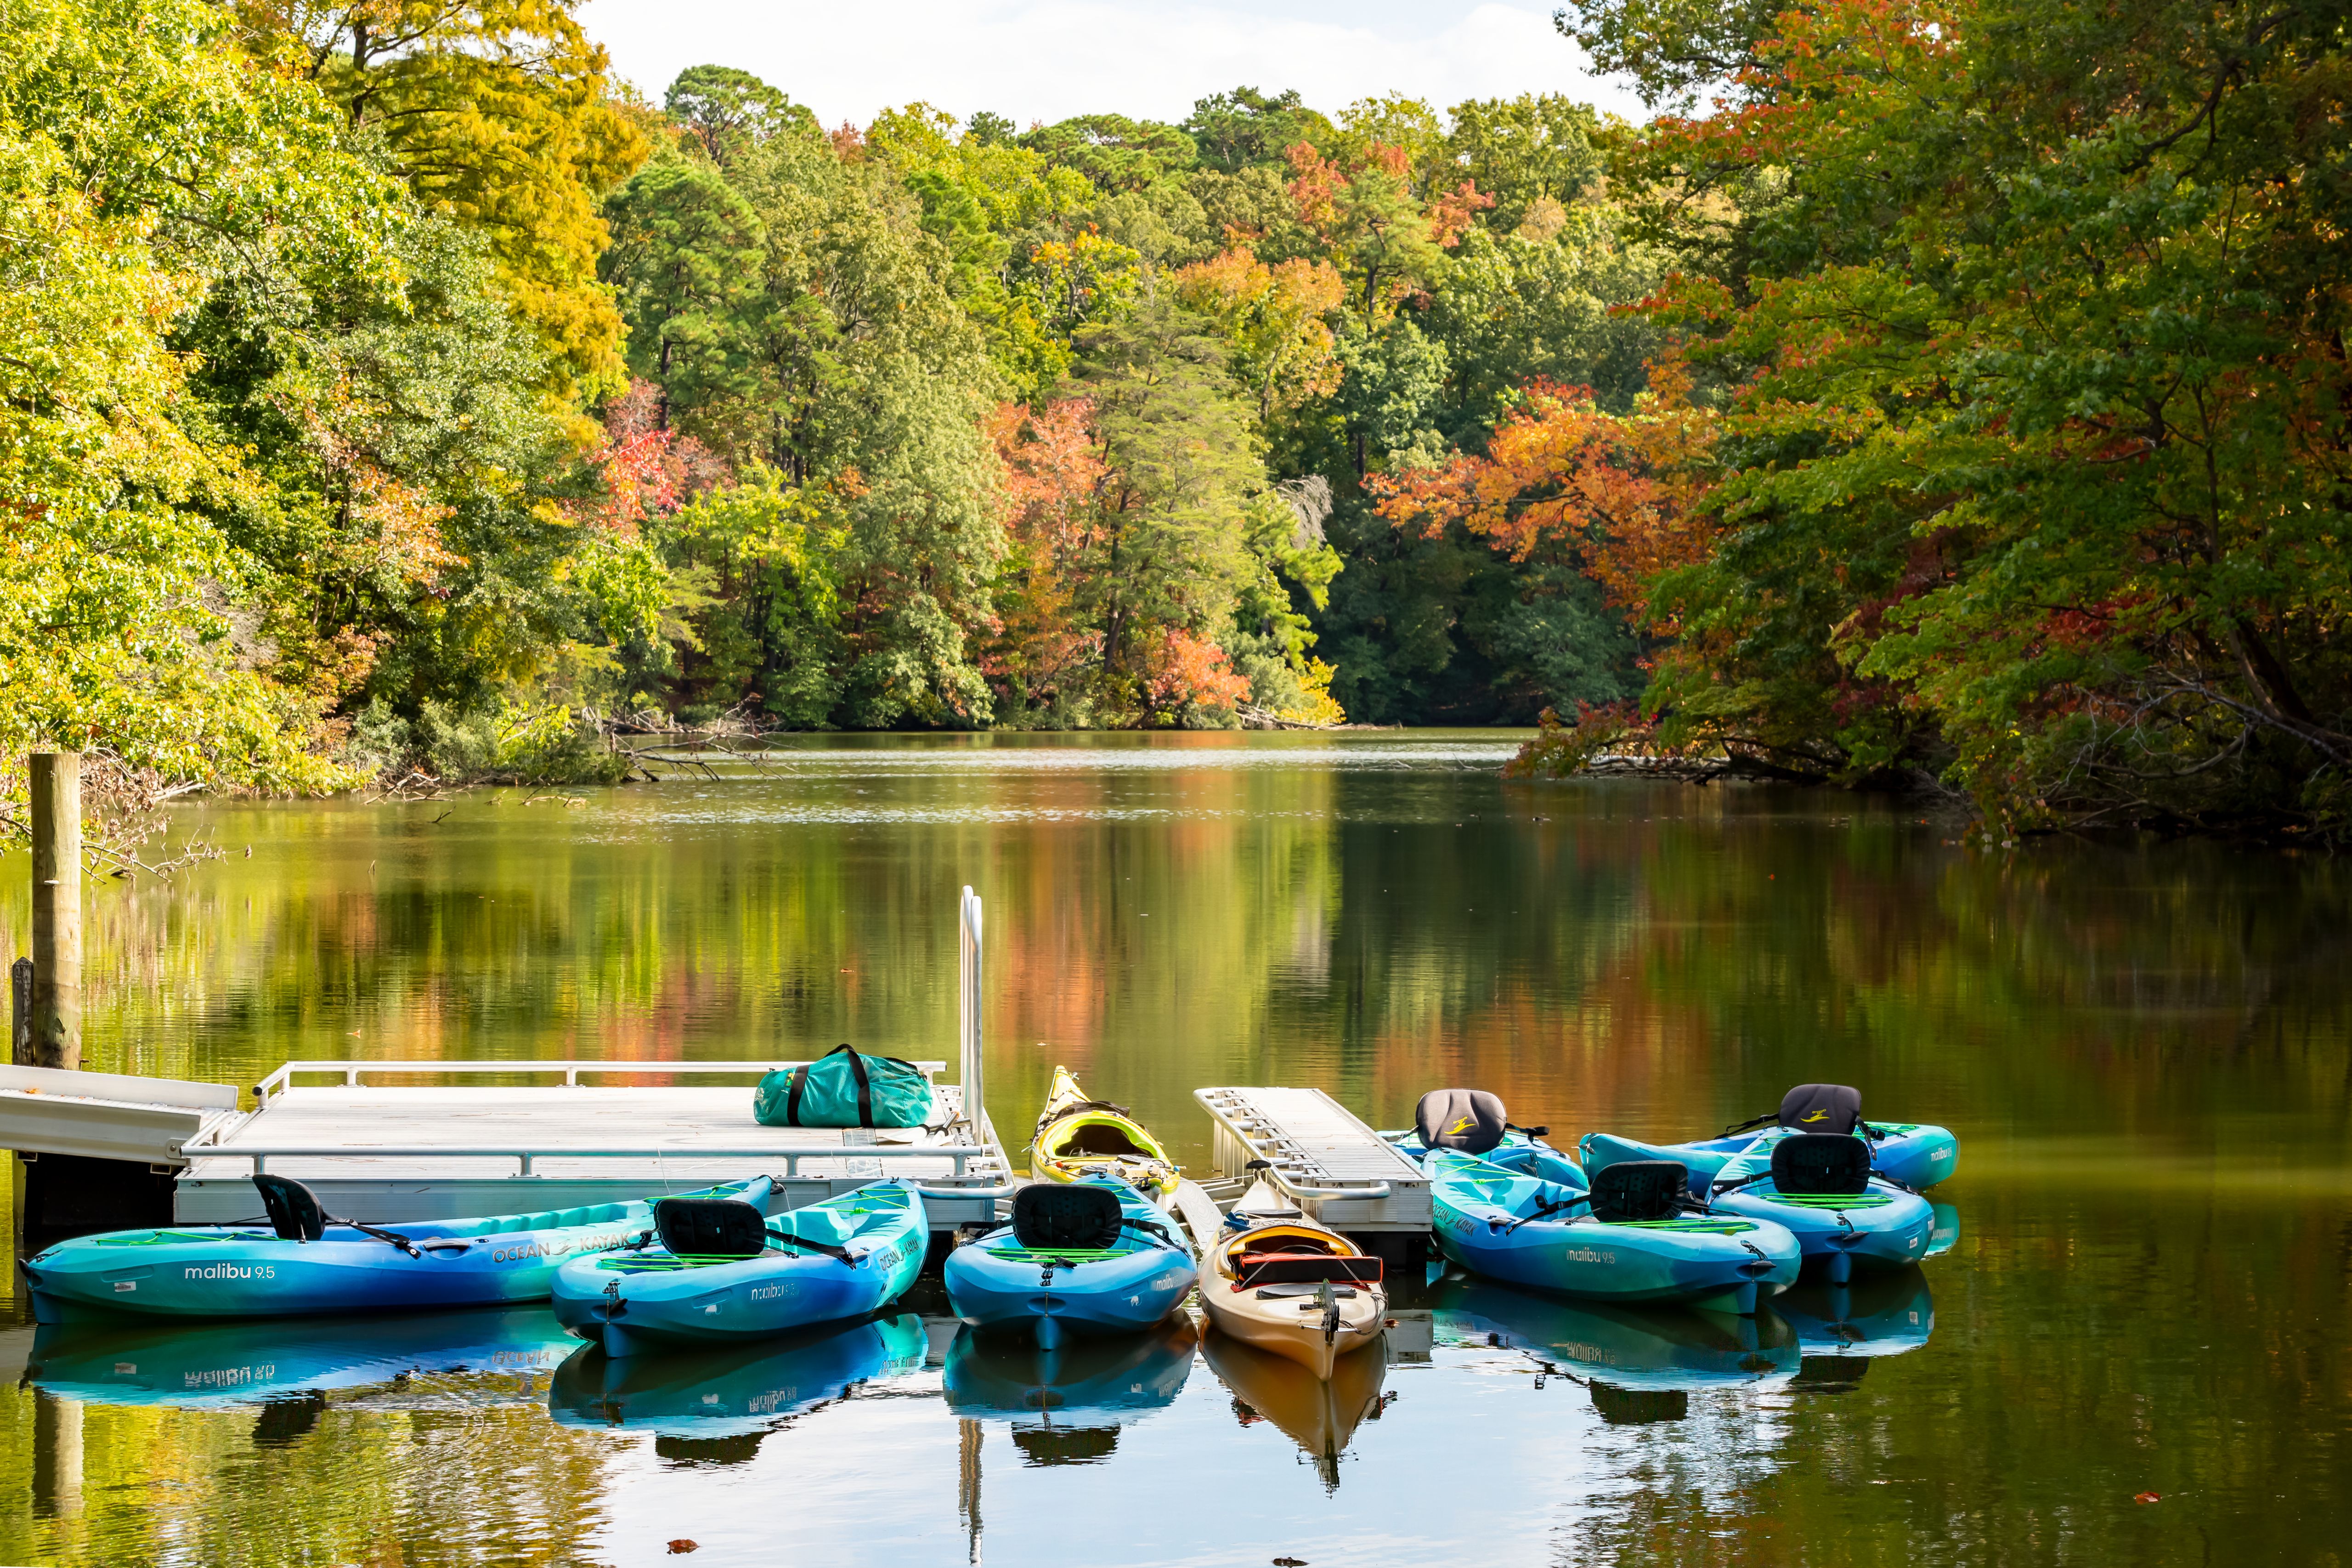 These kayaks on Mariners’ Lake are considered boats since they are small vessels that travel on the water.